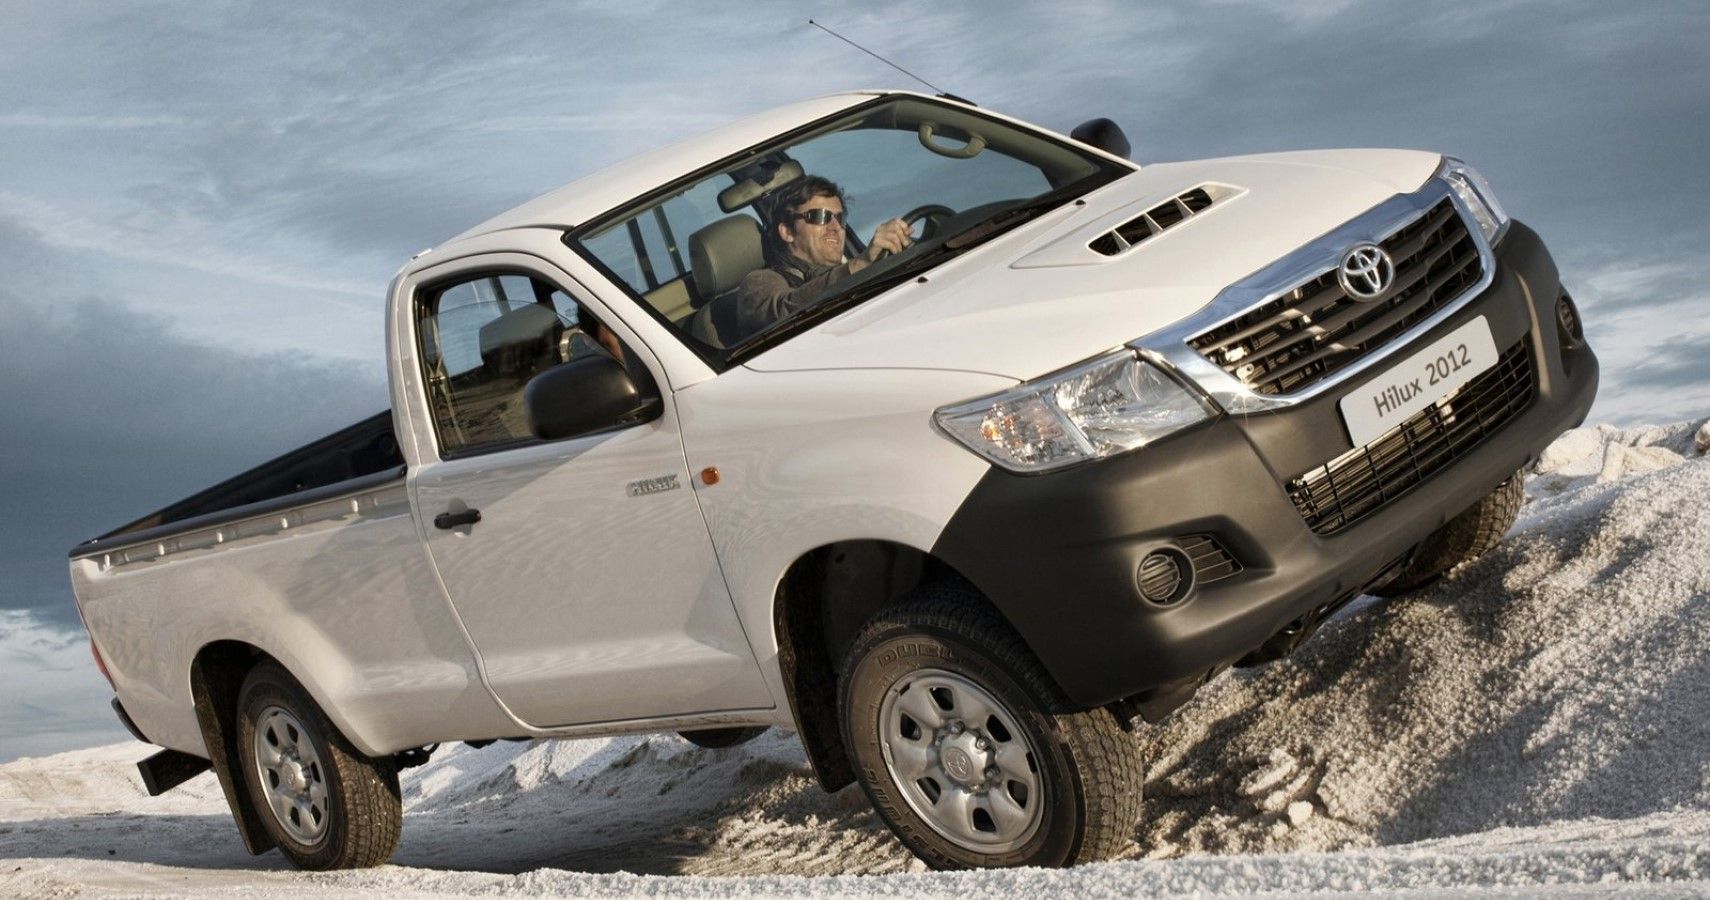 2012 Toyota Hilux extreme off-roading view